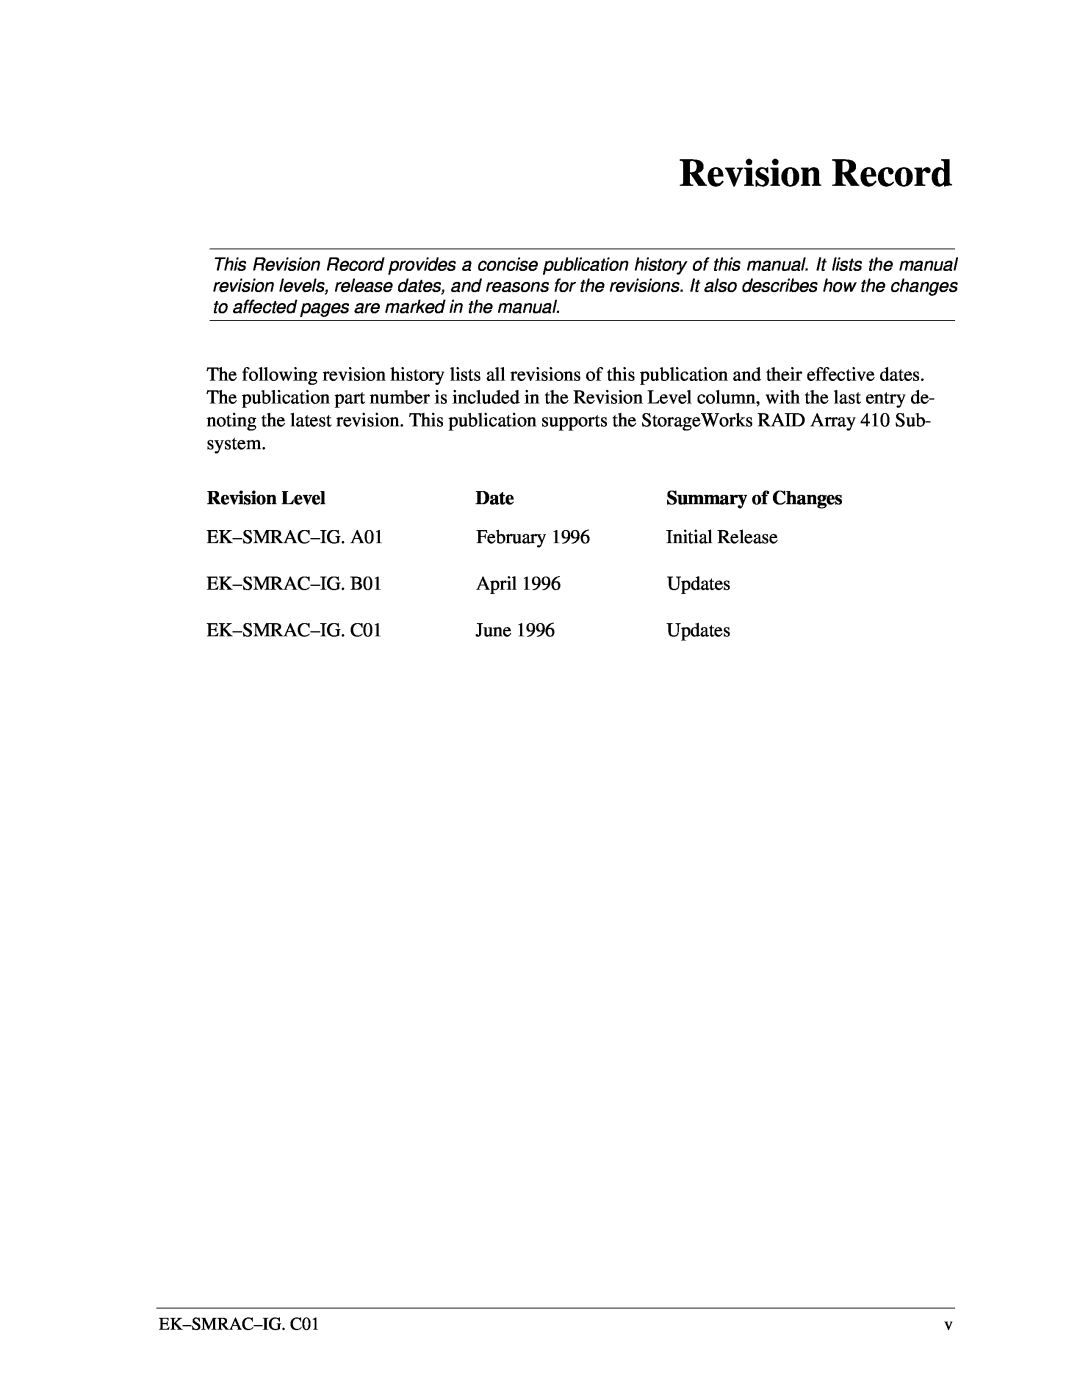 Intel 410 manual Revision Record, Revision Level, Date 